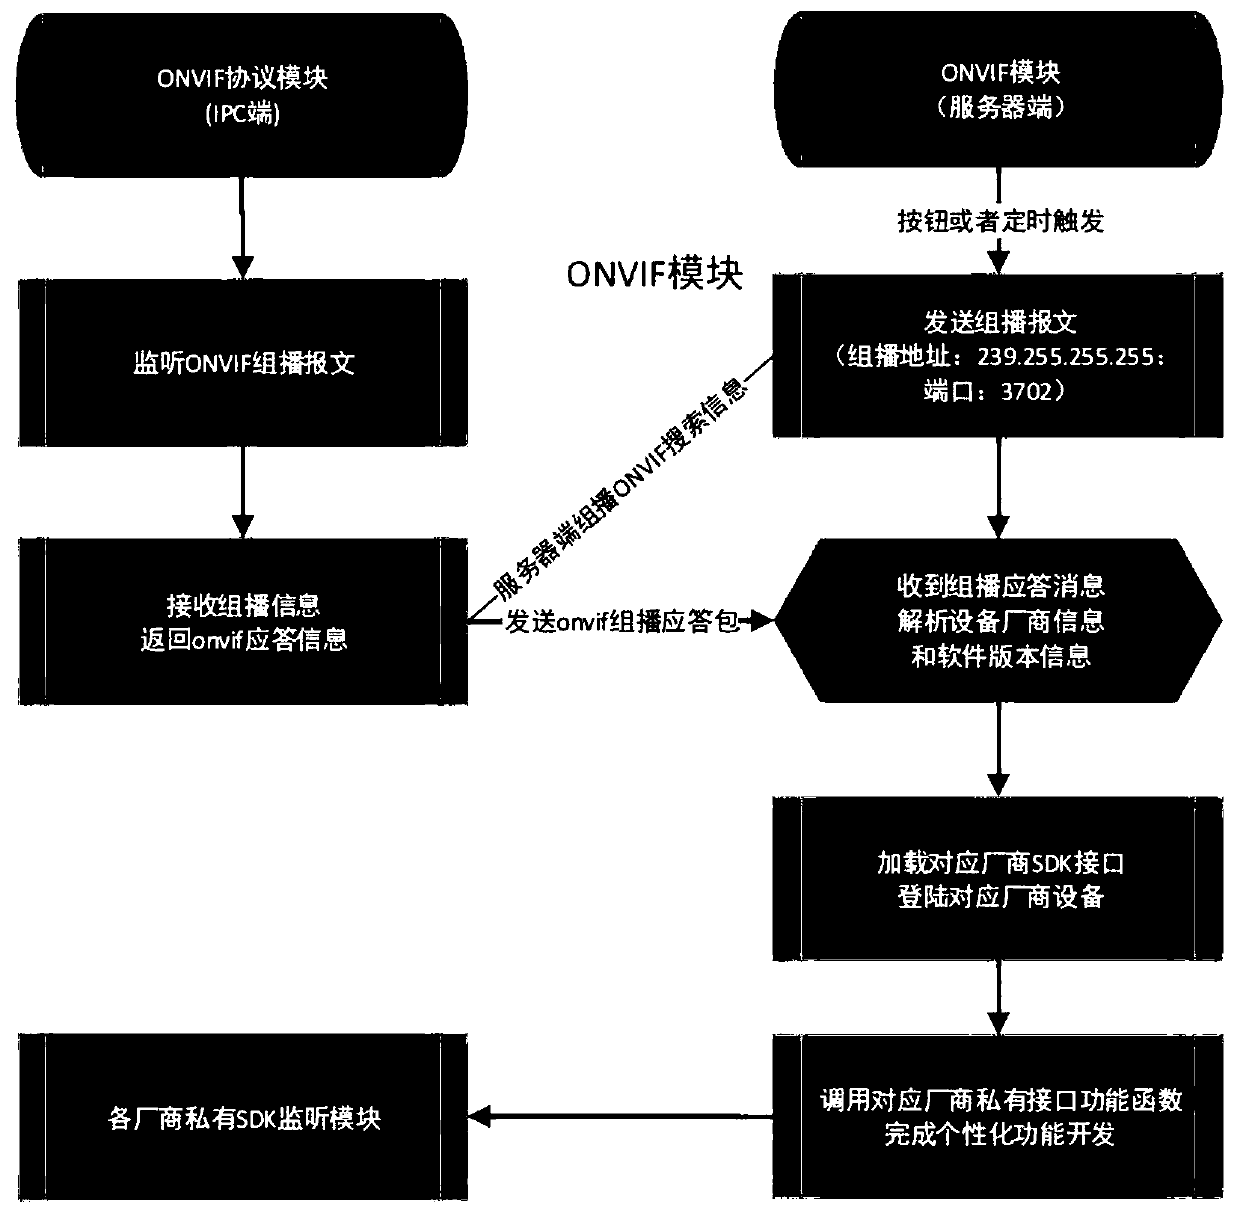 A multi-device search access optimization method based on an onvif protocol